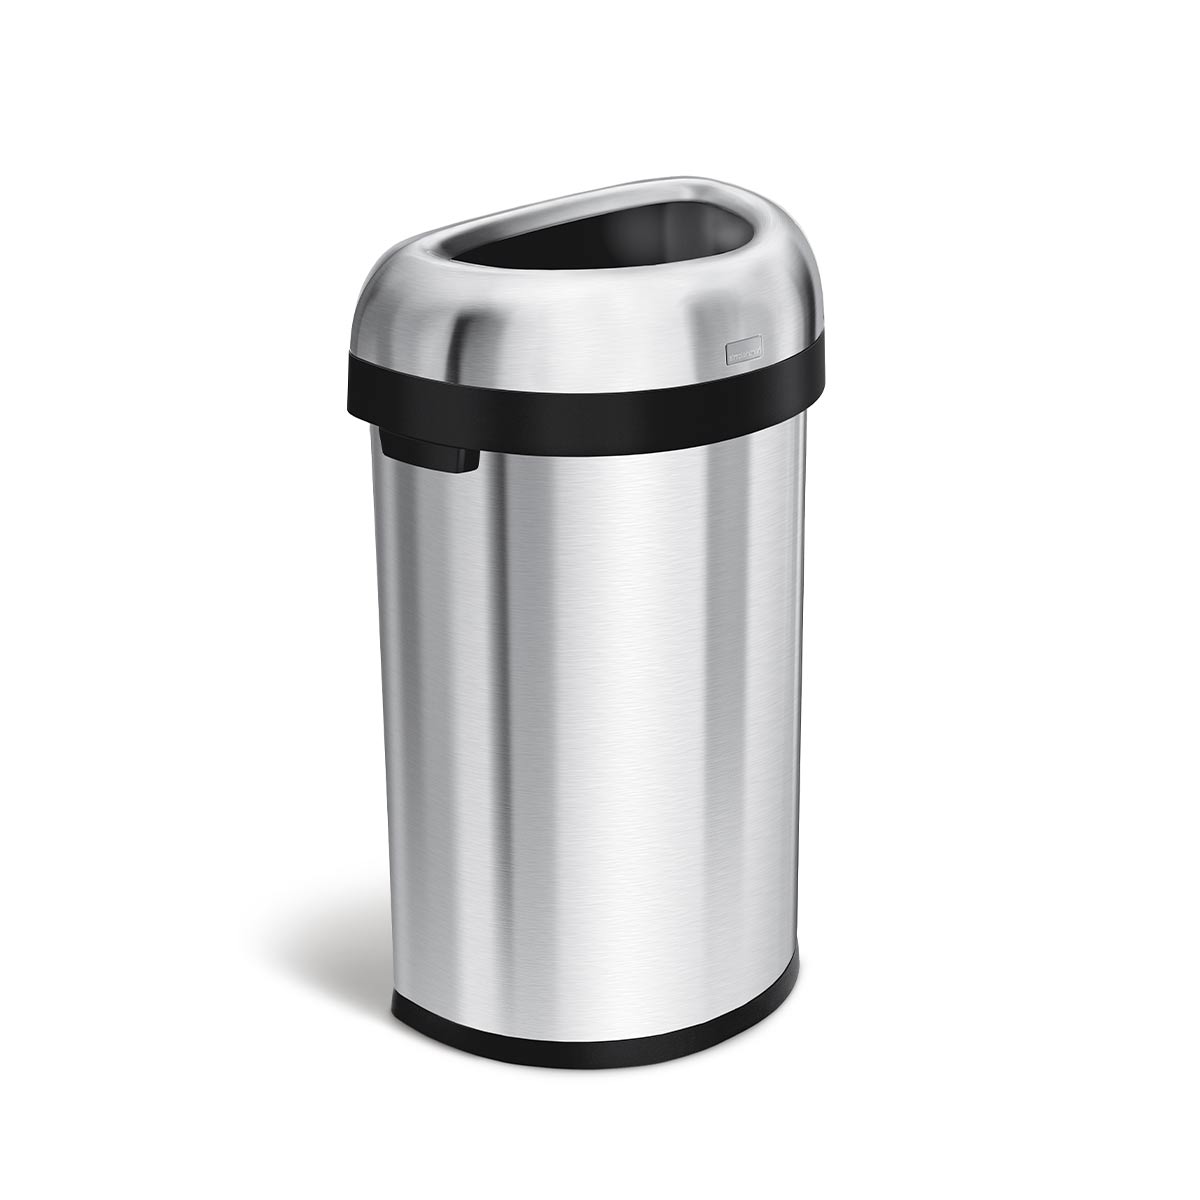 60L semi-round open can - simplehuman